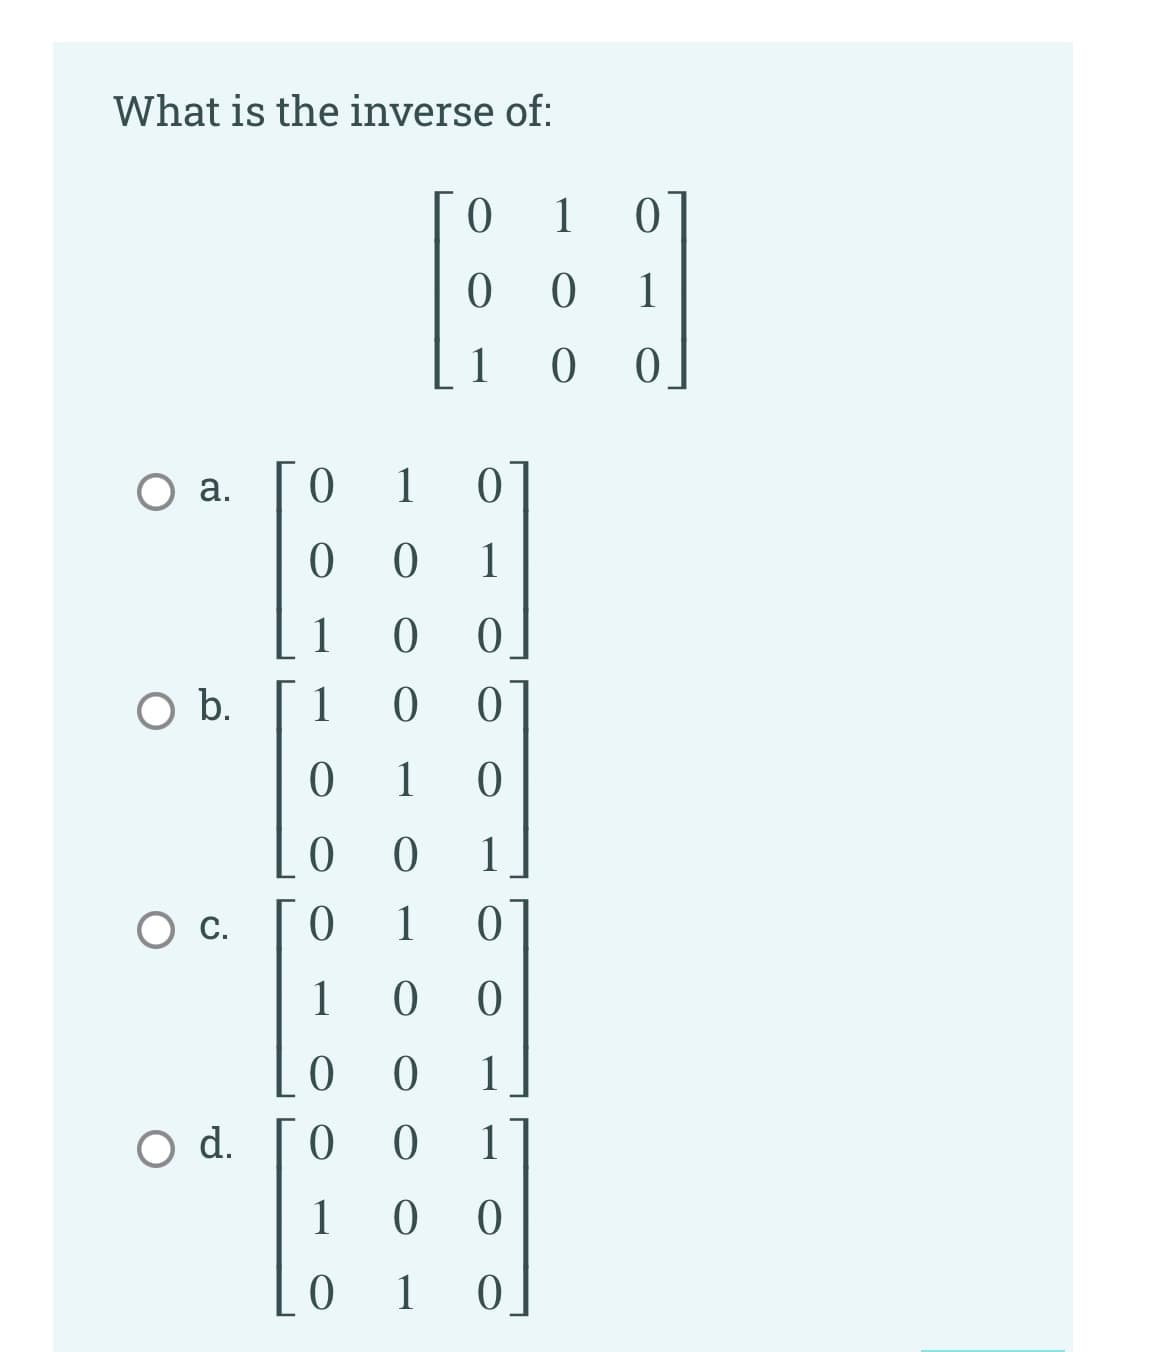 What is the inverse of:
1
1
1
1
1
1
b.
1
1
1
Ос.
1
1
1
O d.
1
1
1 0
a.
